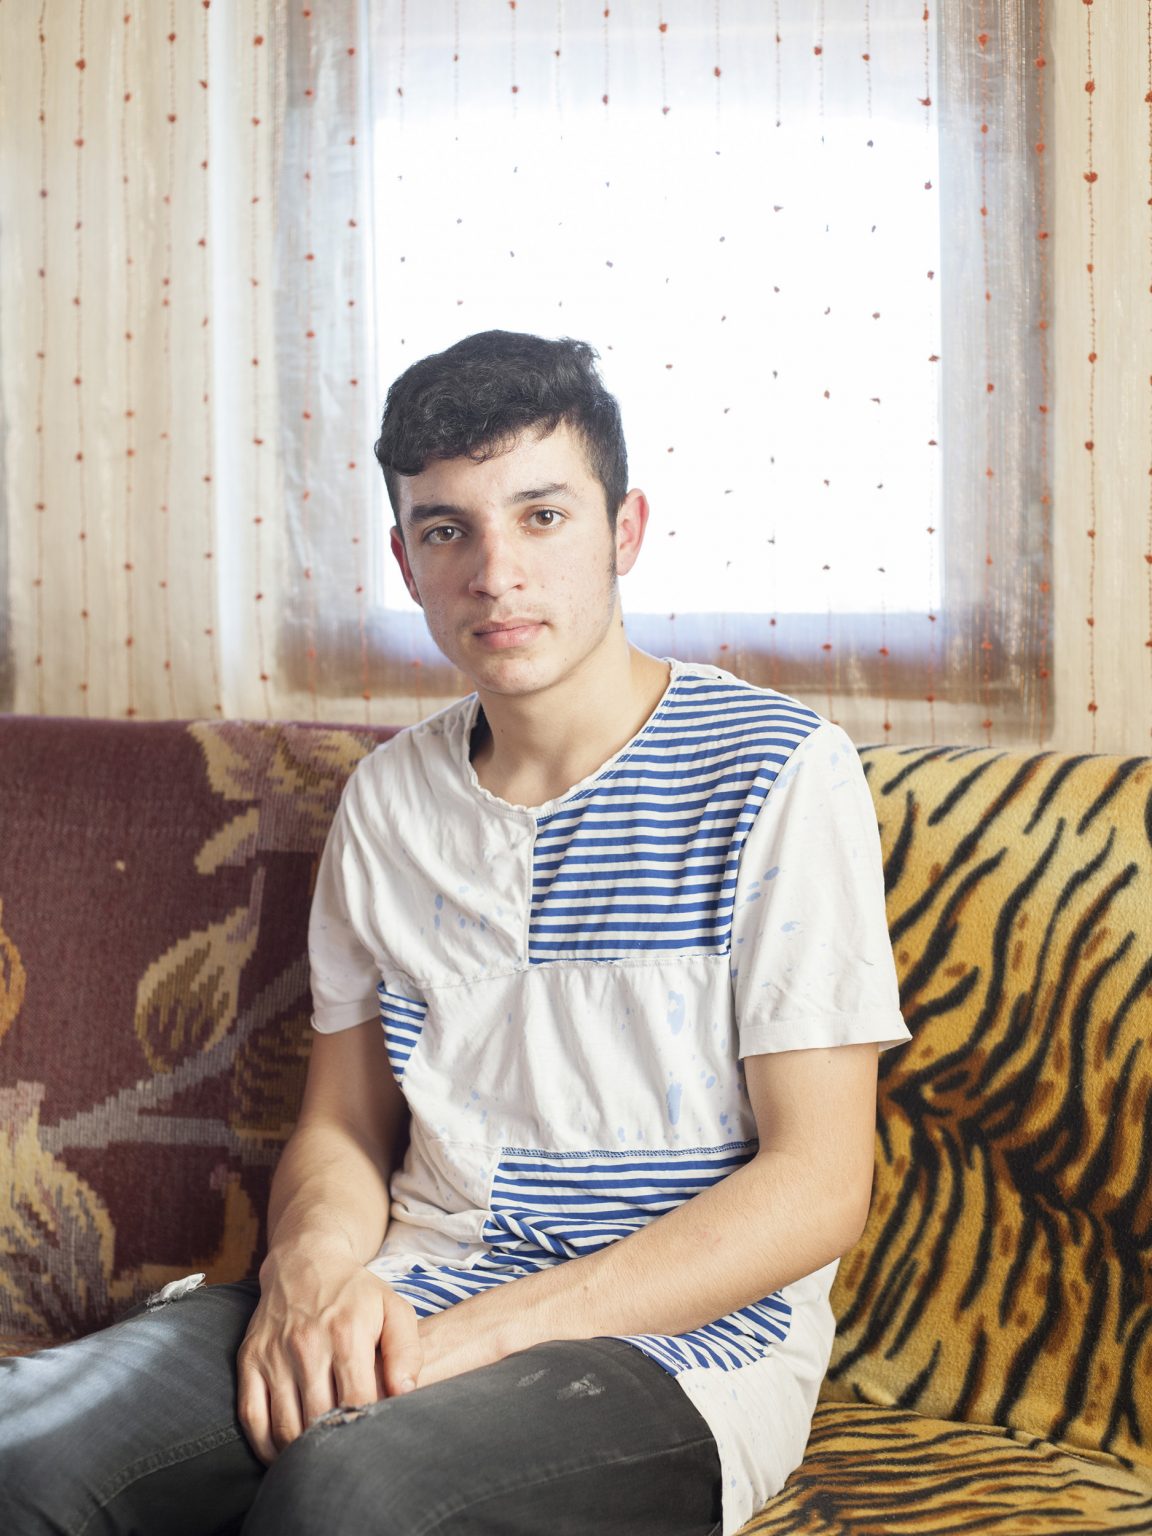 Toniblair Dajaku, 16 years old in the village of Rakinic in the municipality of Skënderaj / Srbica. He was named in honor of the former UK prime minister Tony Blair for the support during the war with the former Yugoslavia.